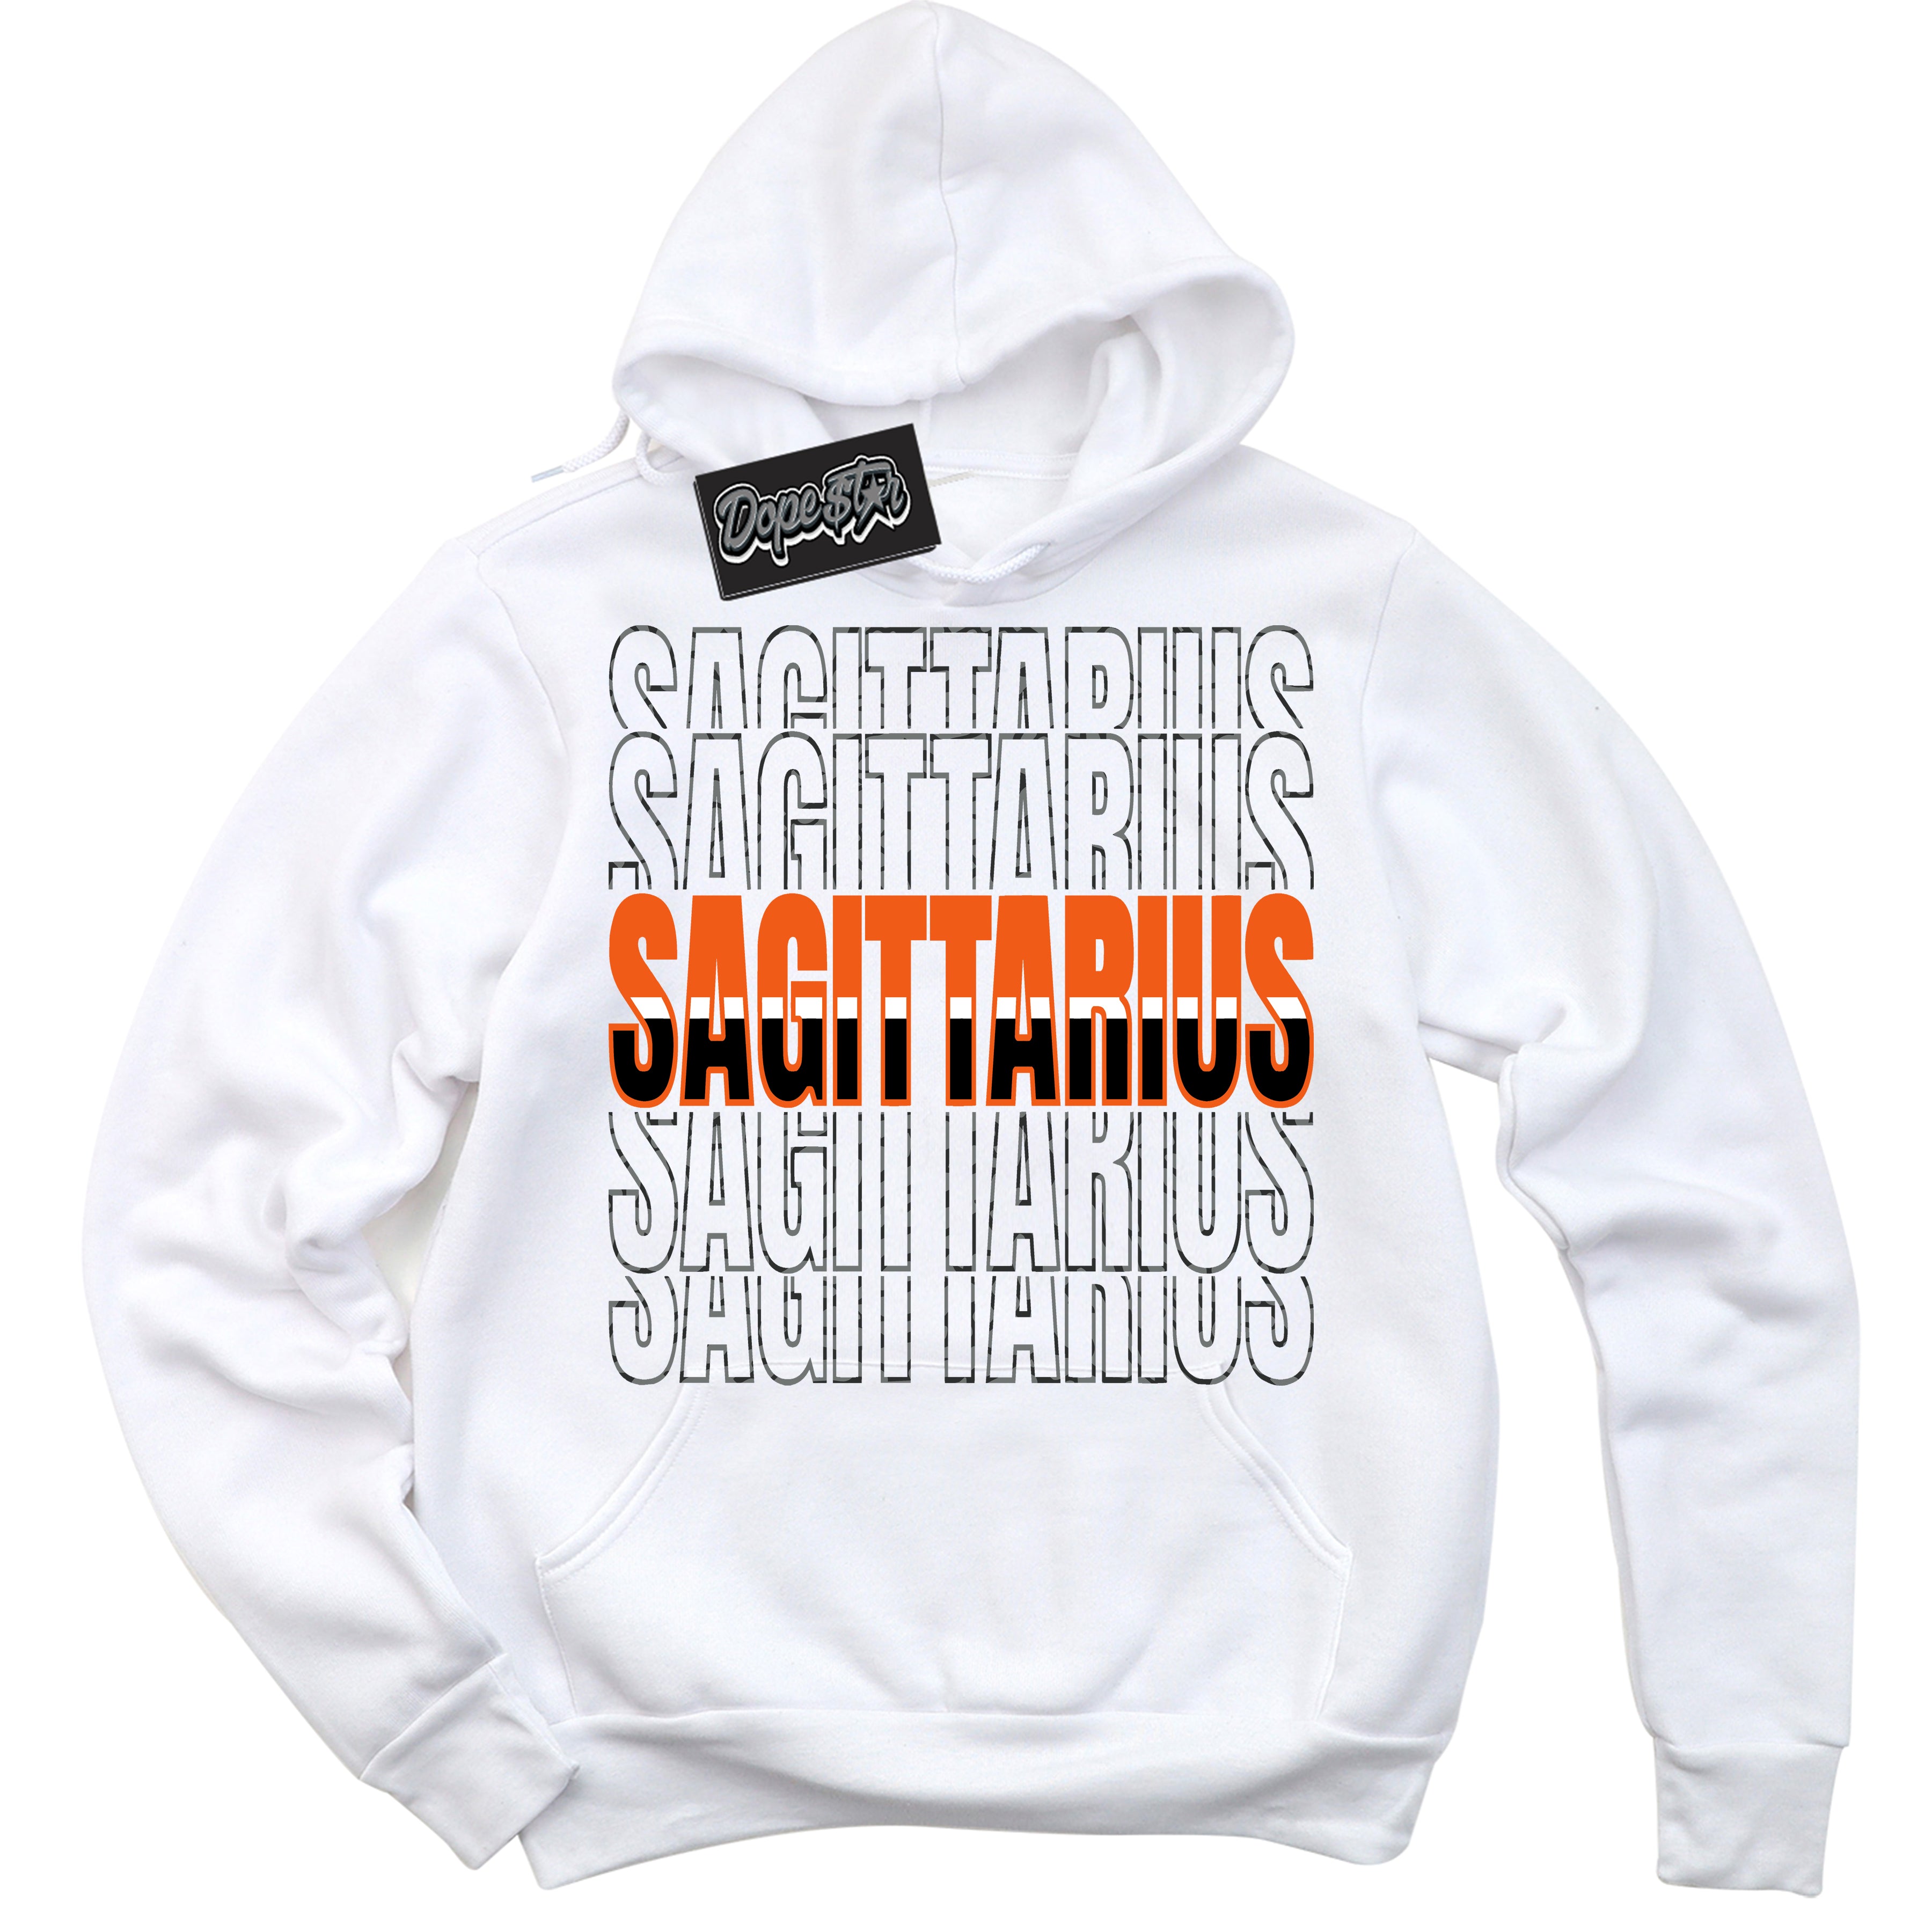 Cool White Graphic DopeStar Hoodie with “  Sagittarius “ print, that perfectly matches Fear Pack 3s sneakers